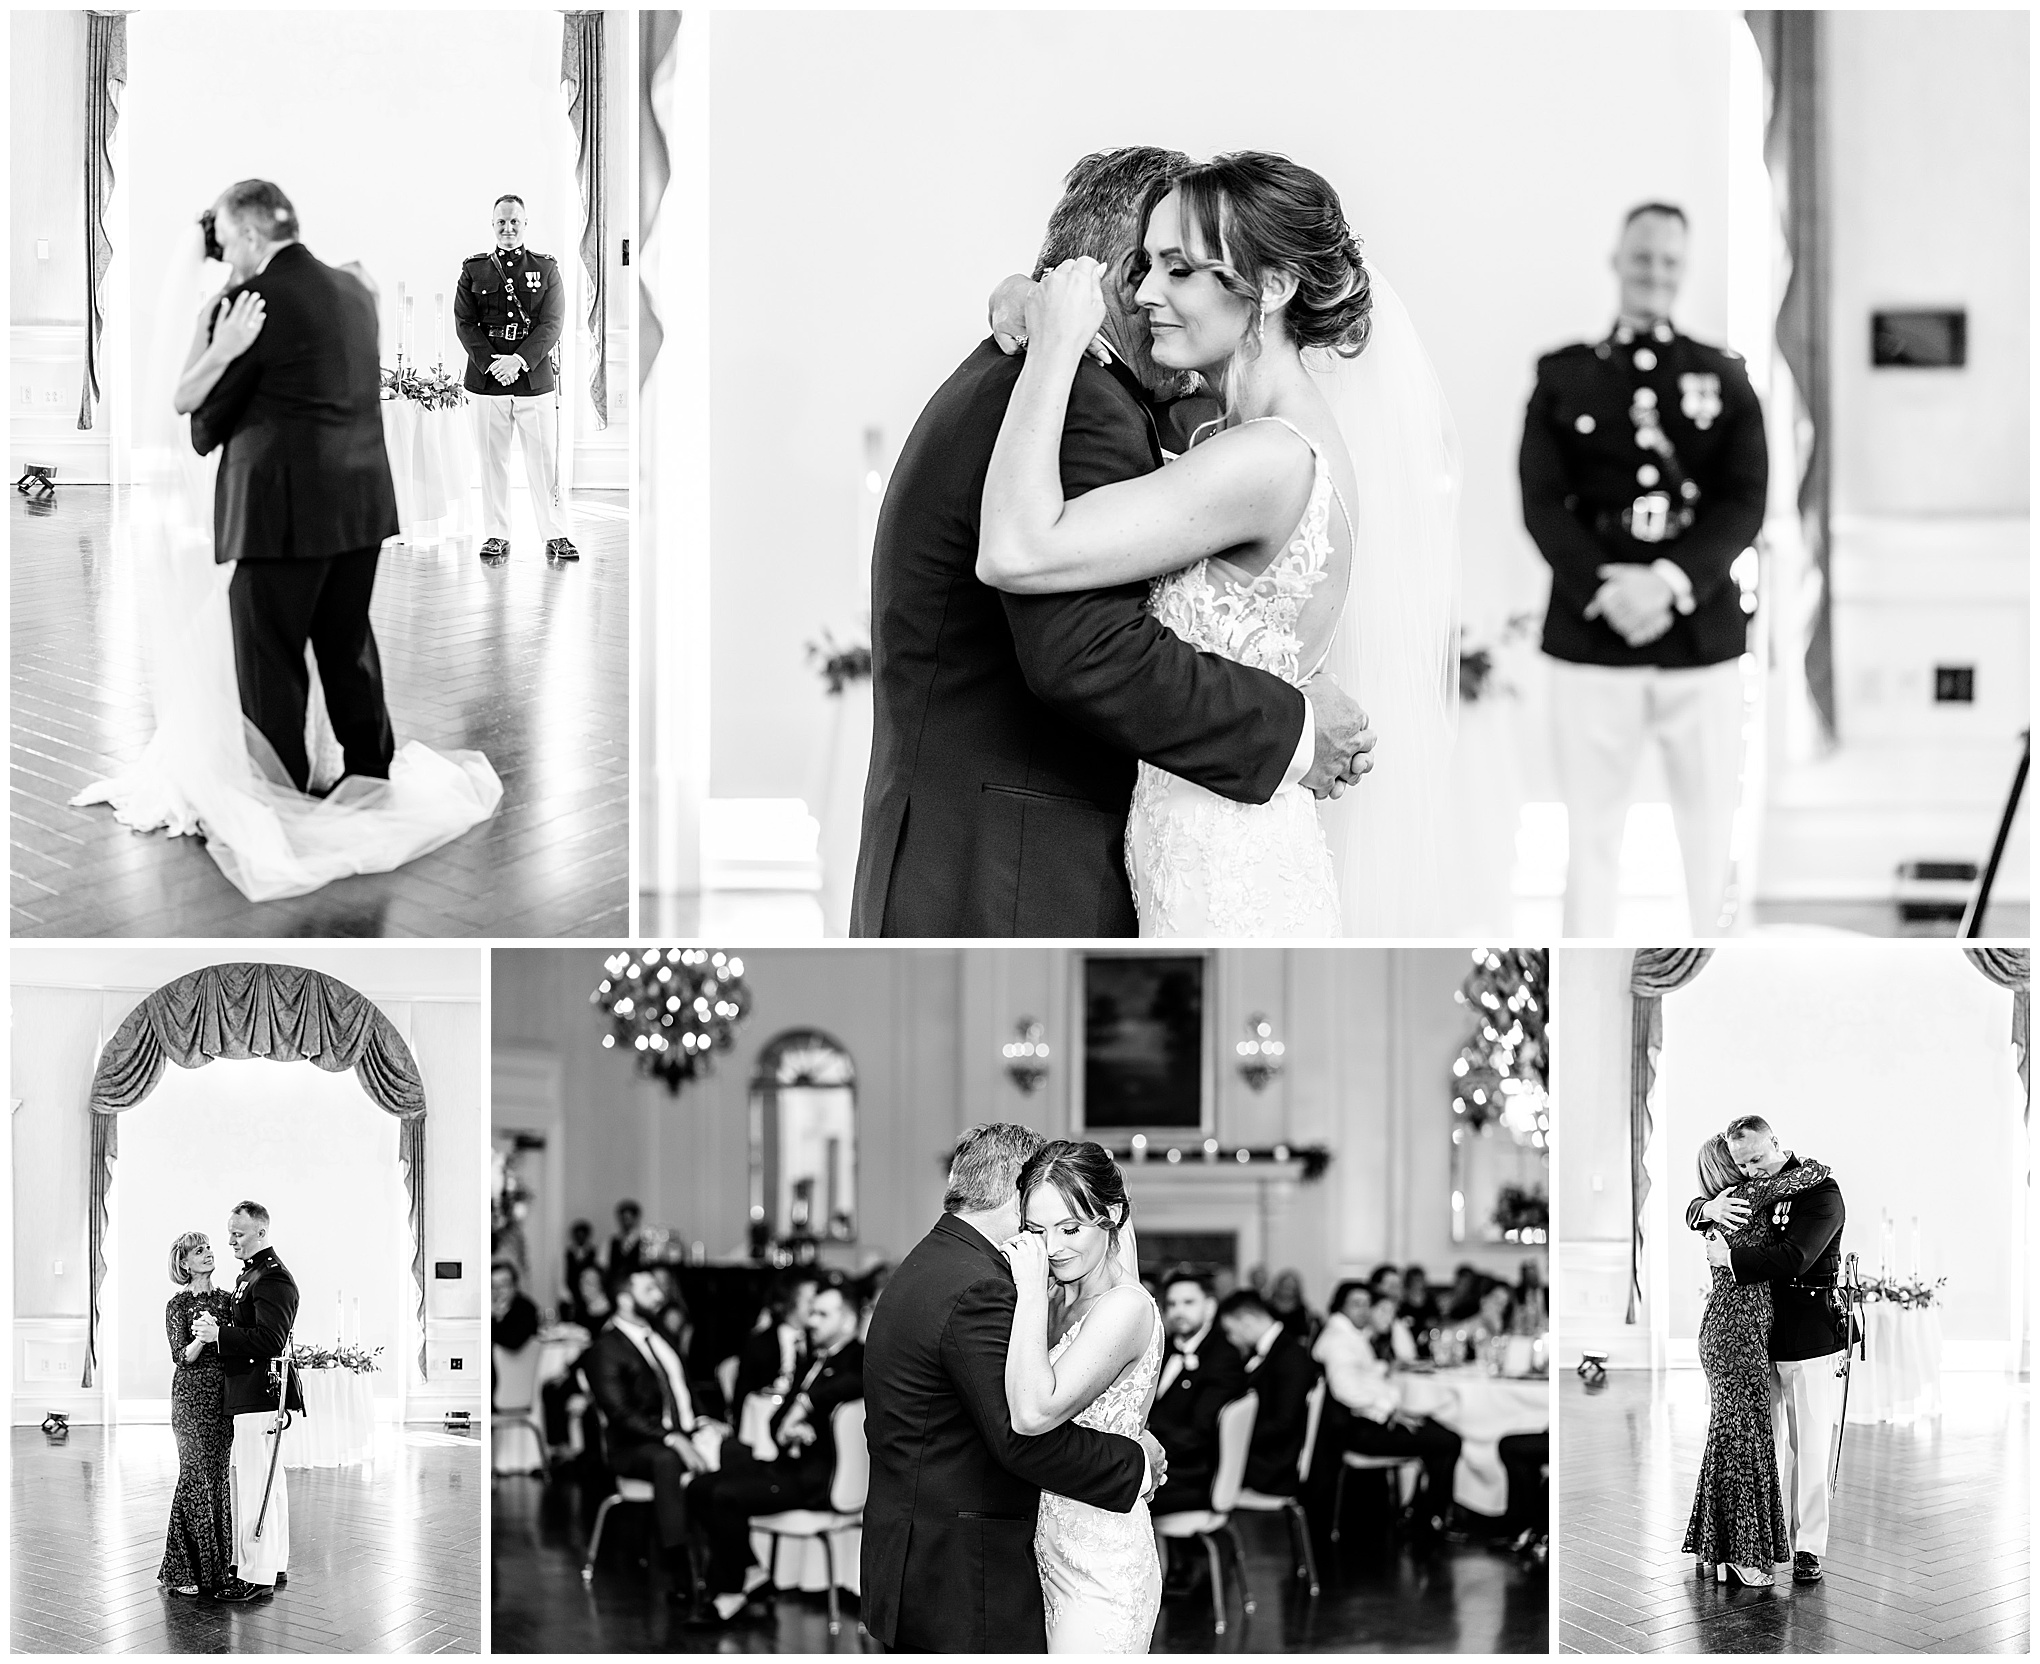 Army Navy Country Club Arlington wedding, country club wedding, DC wedding venues, Arlington Virginia wedding venue, DC wedding photographer, northern Virginia wedding photographer, spring wedding, white wedding aesthetic, military wedding aesthetic, Rachel E.H. Photography, bride dancing with father, groom dancing with mother, black and white